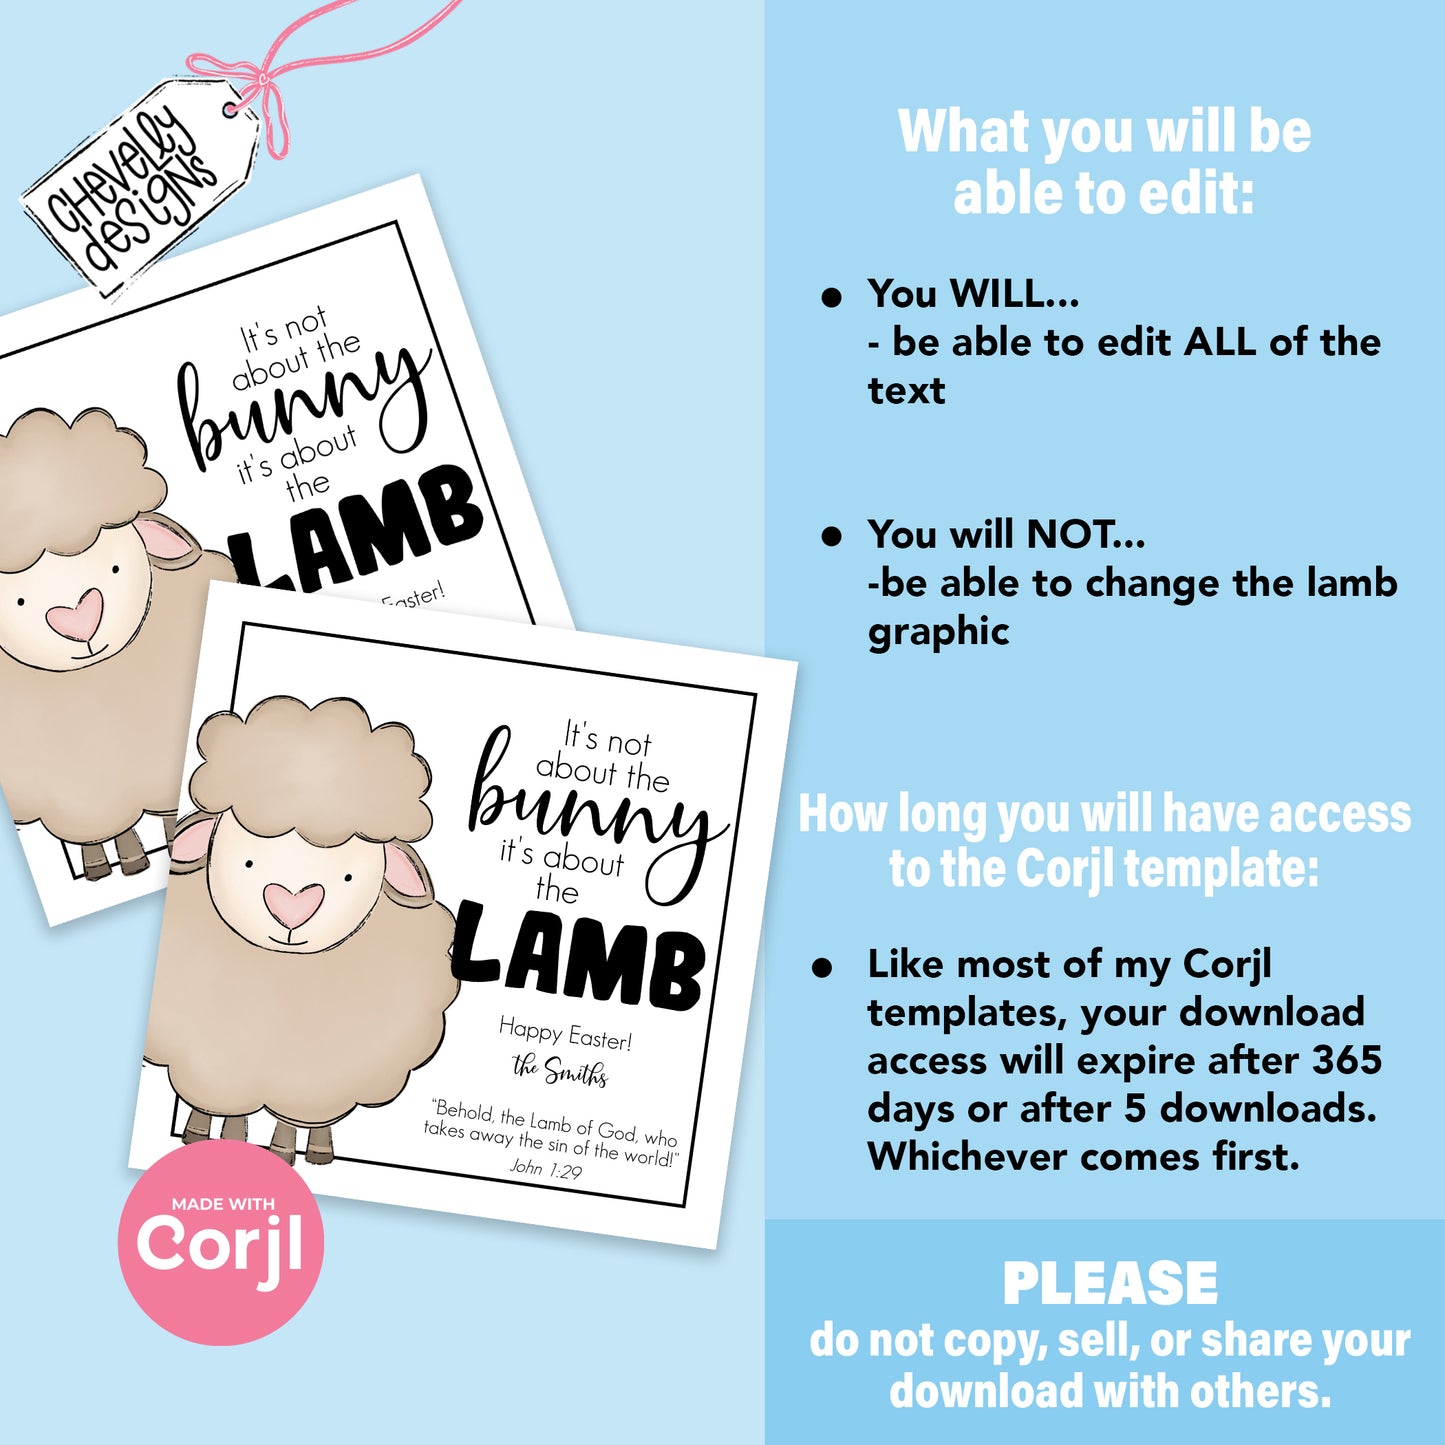 EDITABLE - Not about the bunny It's about the Lamb - Easter Treat Tags - Printable Digital File